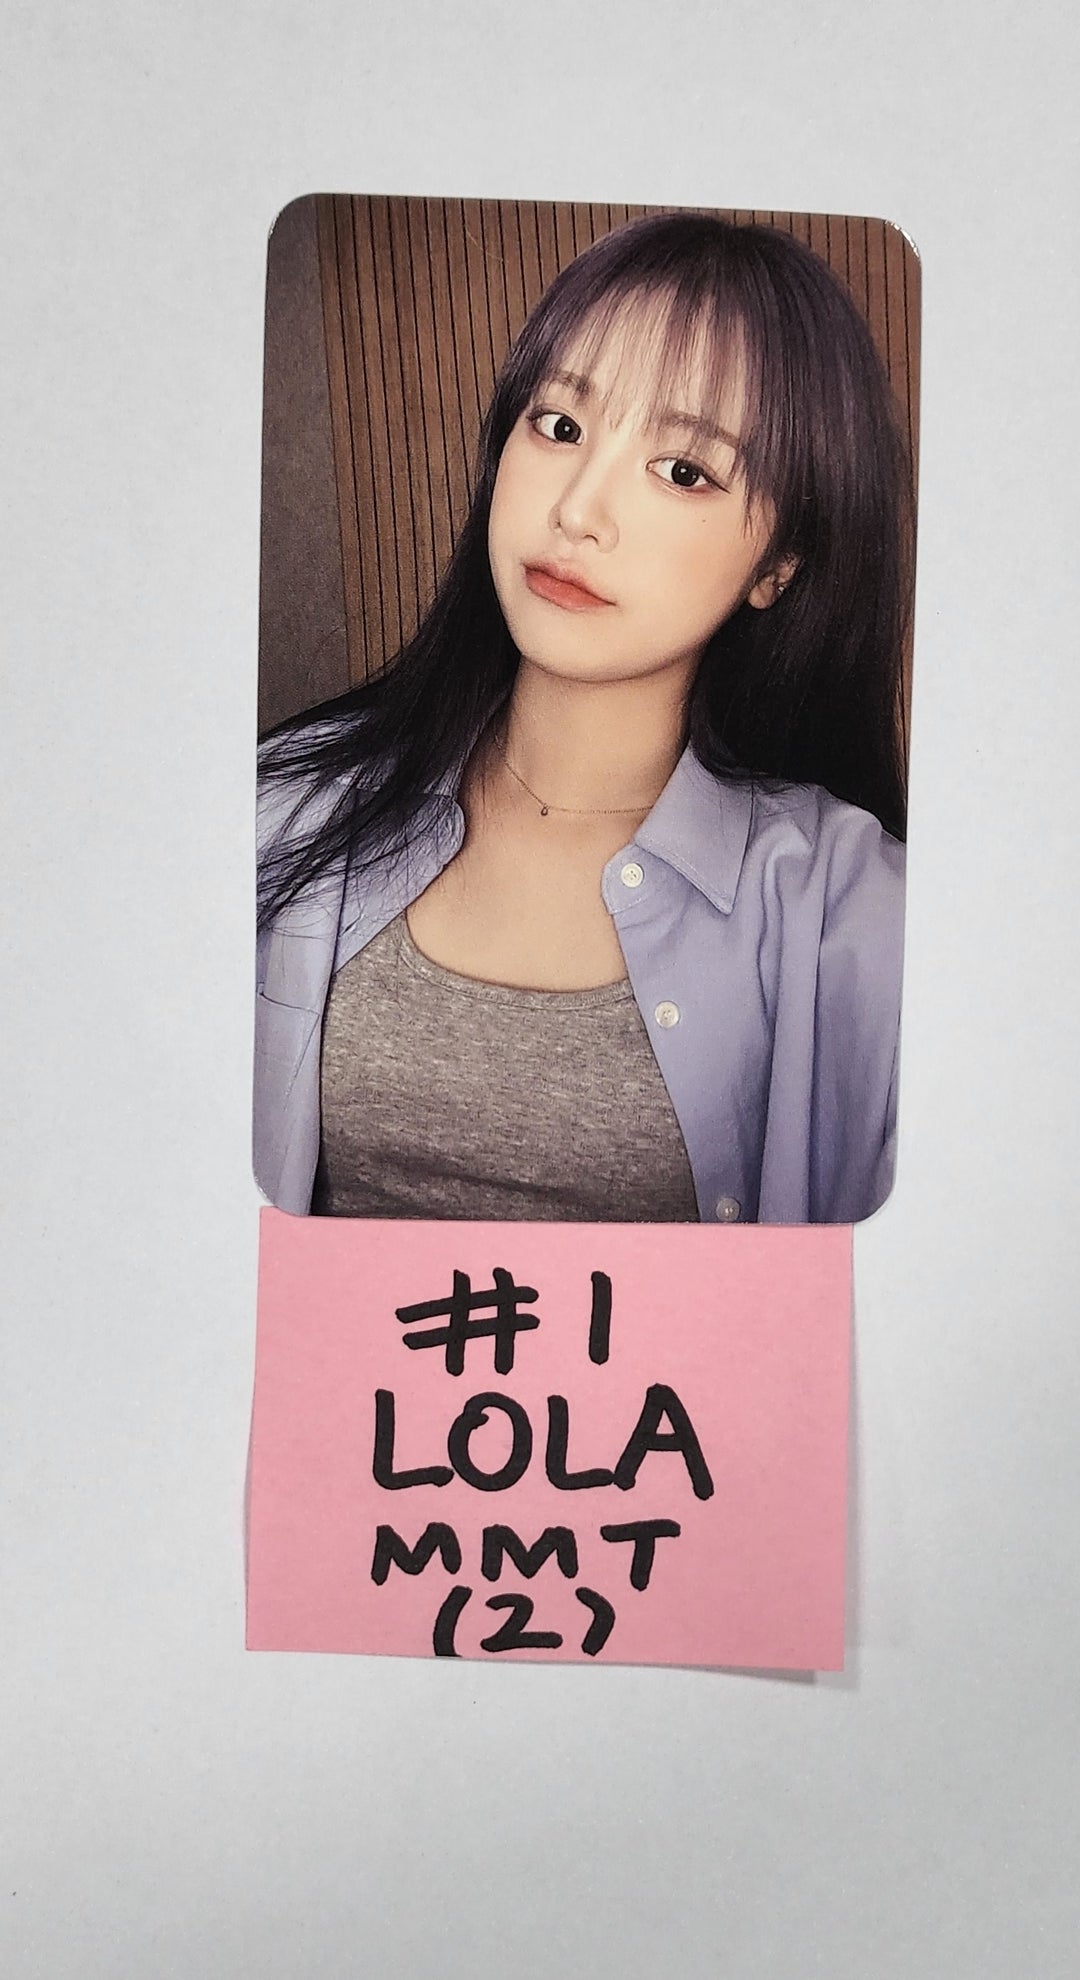 Pixy 'REBORN' - MMT Fansign Event Photocard